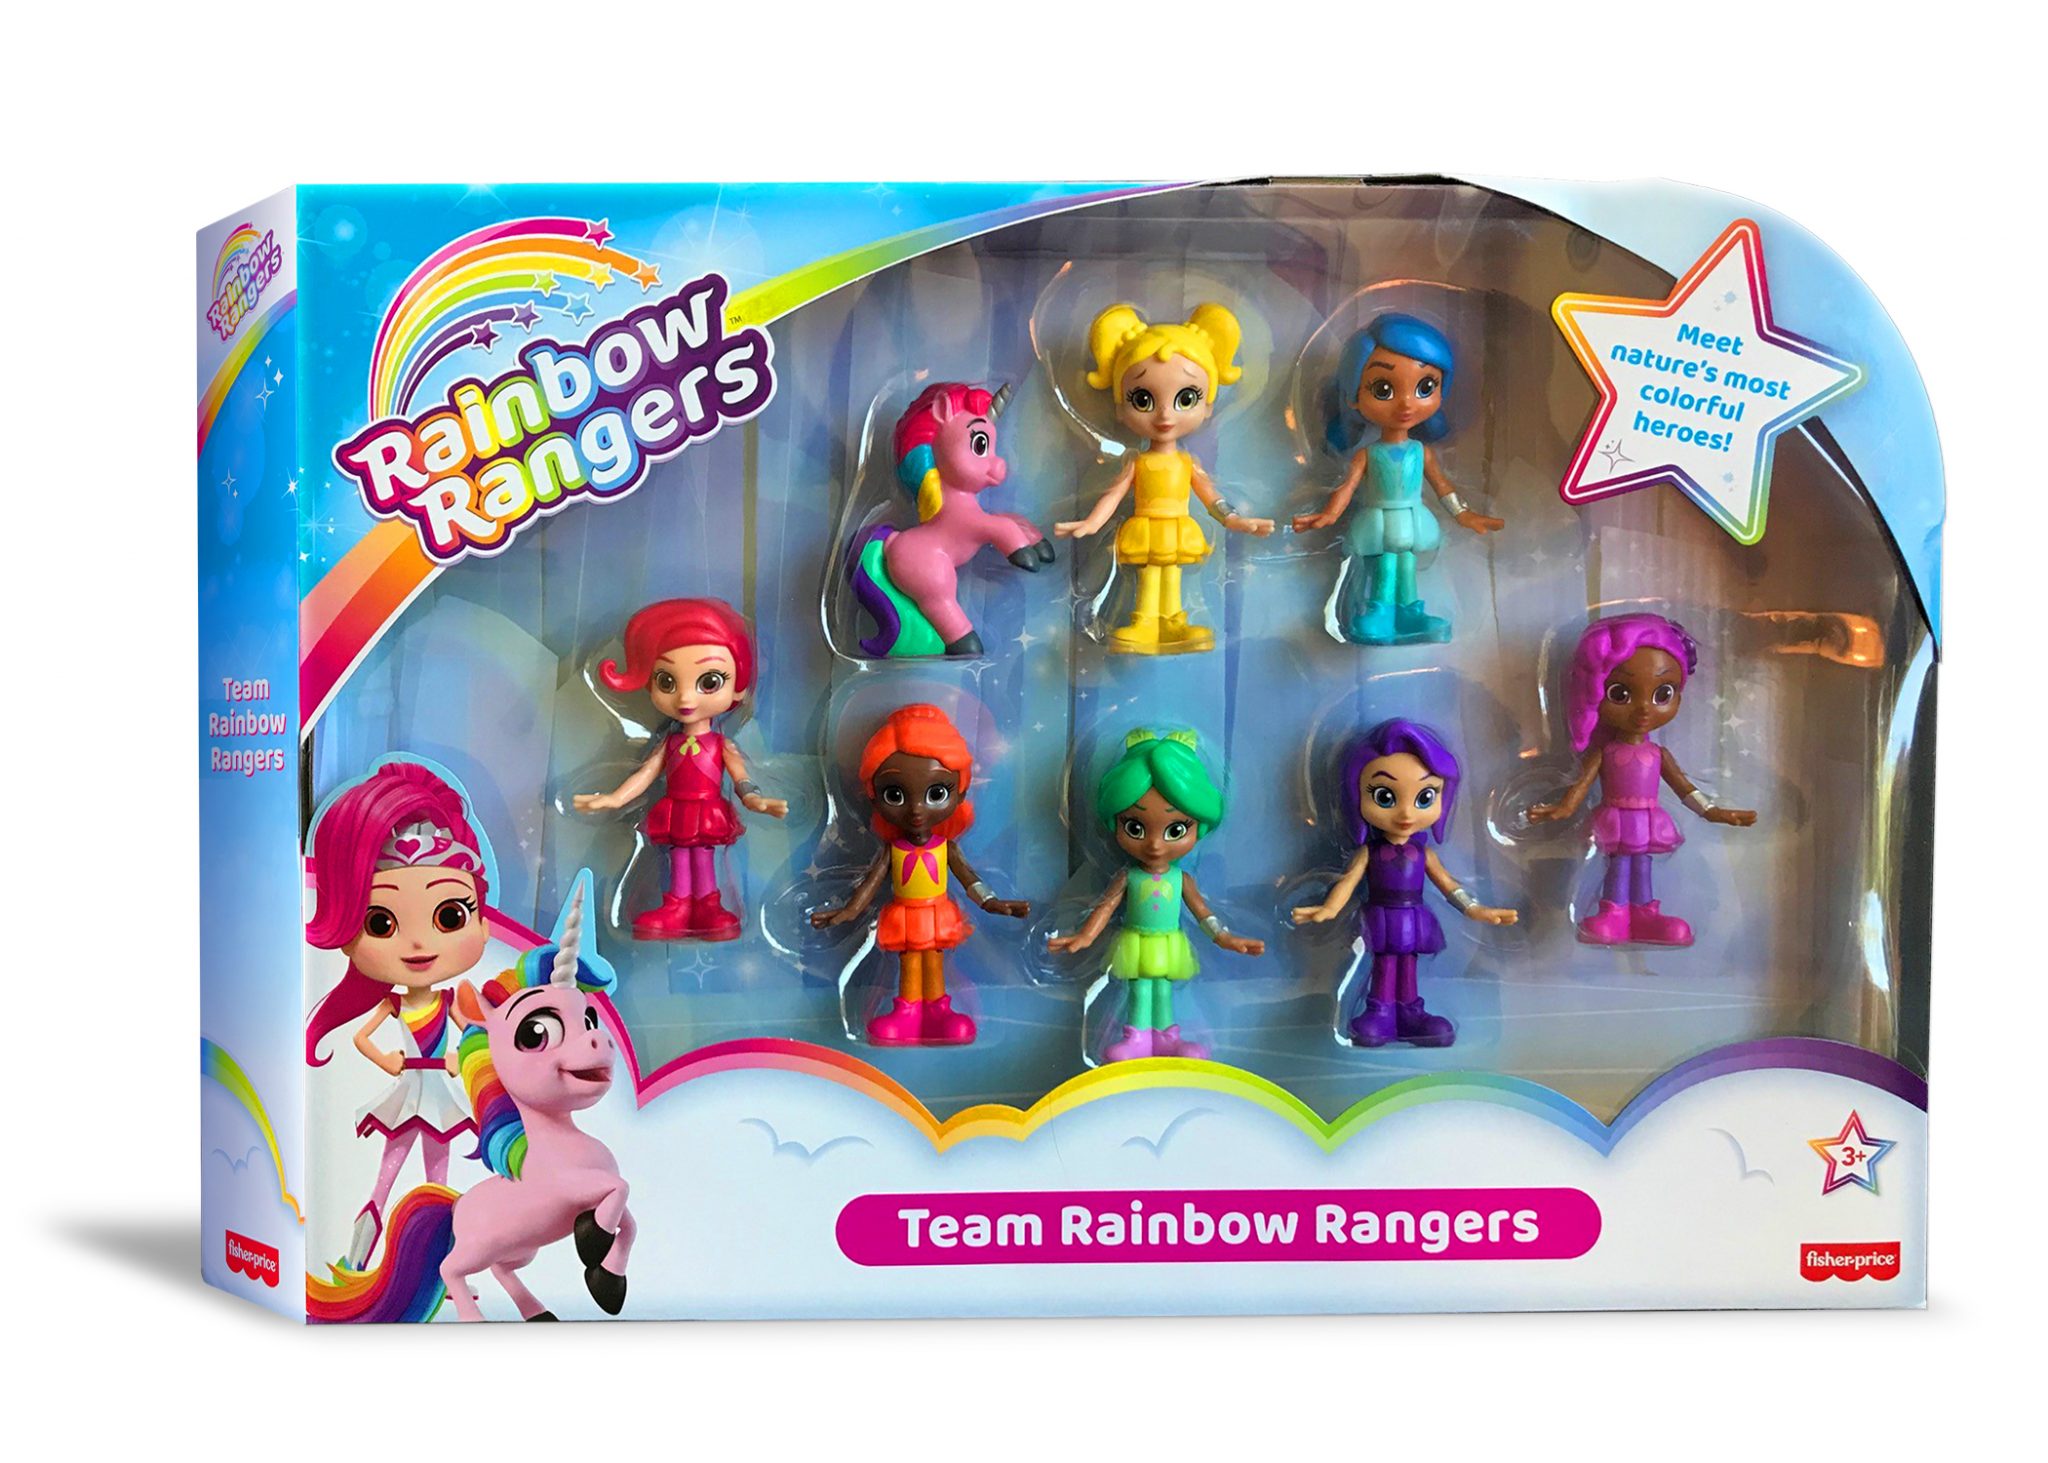 Nickelodeon’s Nick Jr. to Premiere All-New Episodes This Fall of Genius Brands International’s Hit Animation ‘Rainbow Rangers’ image